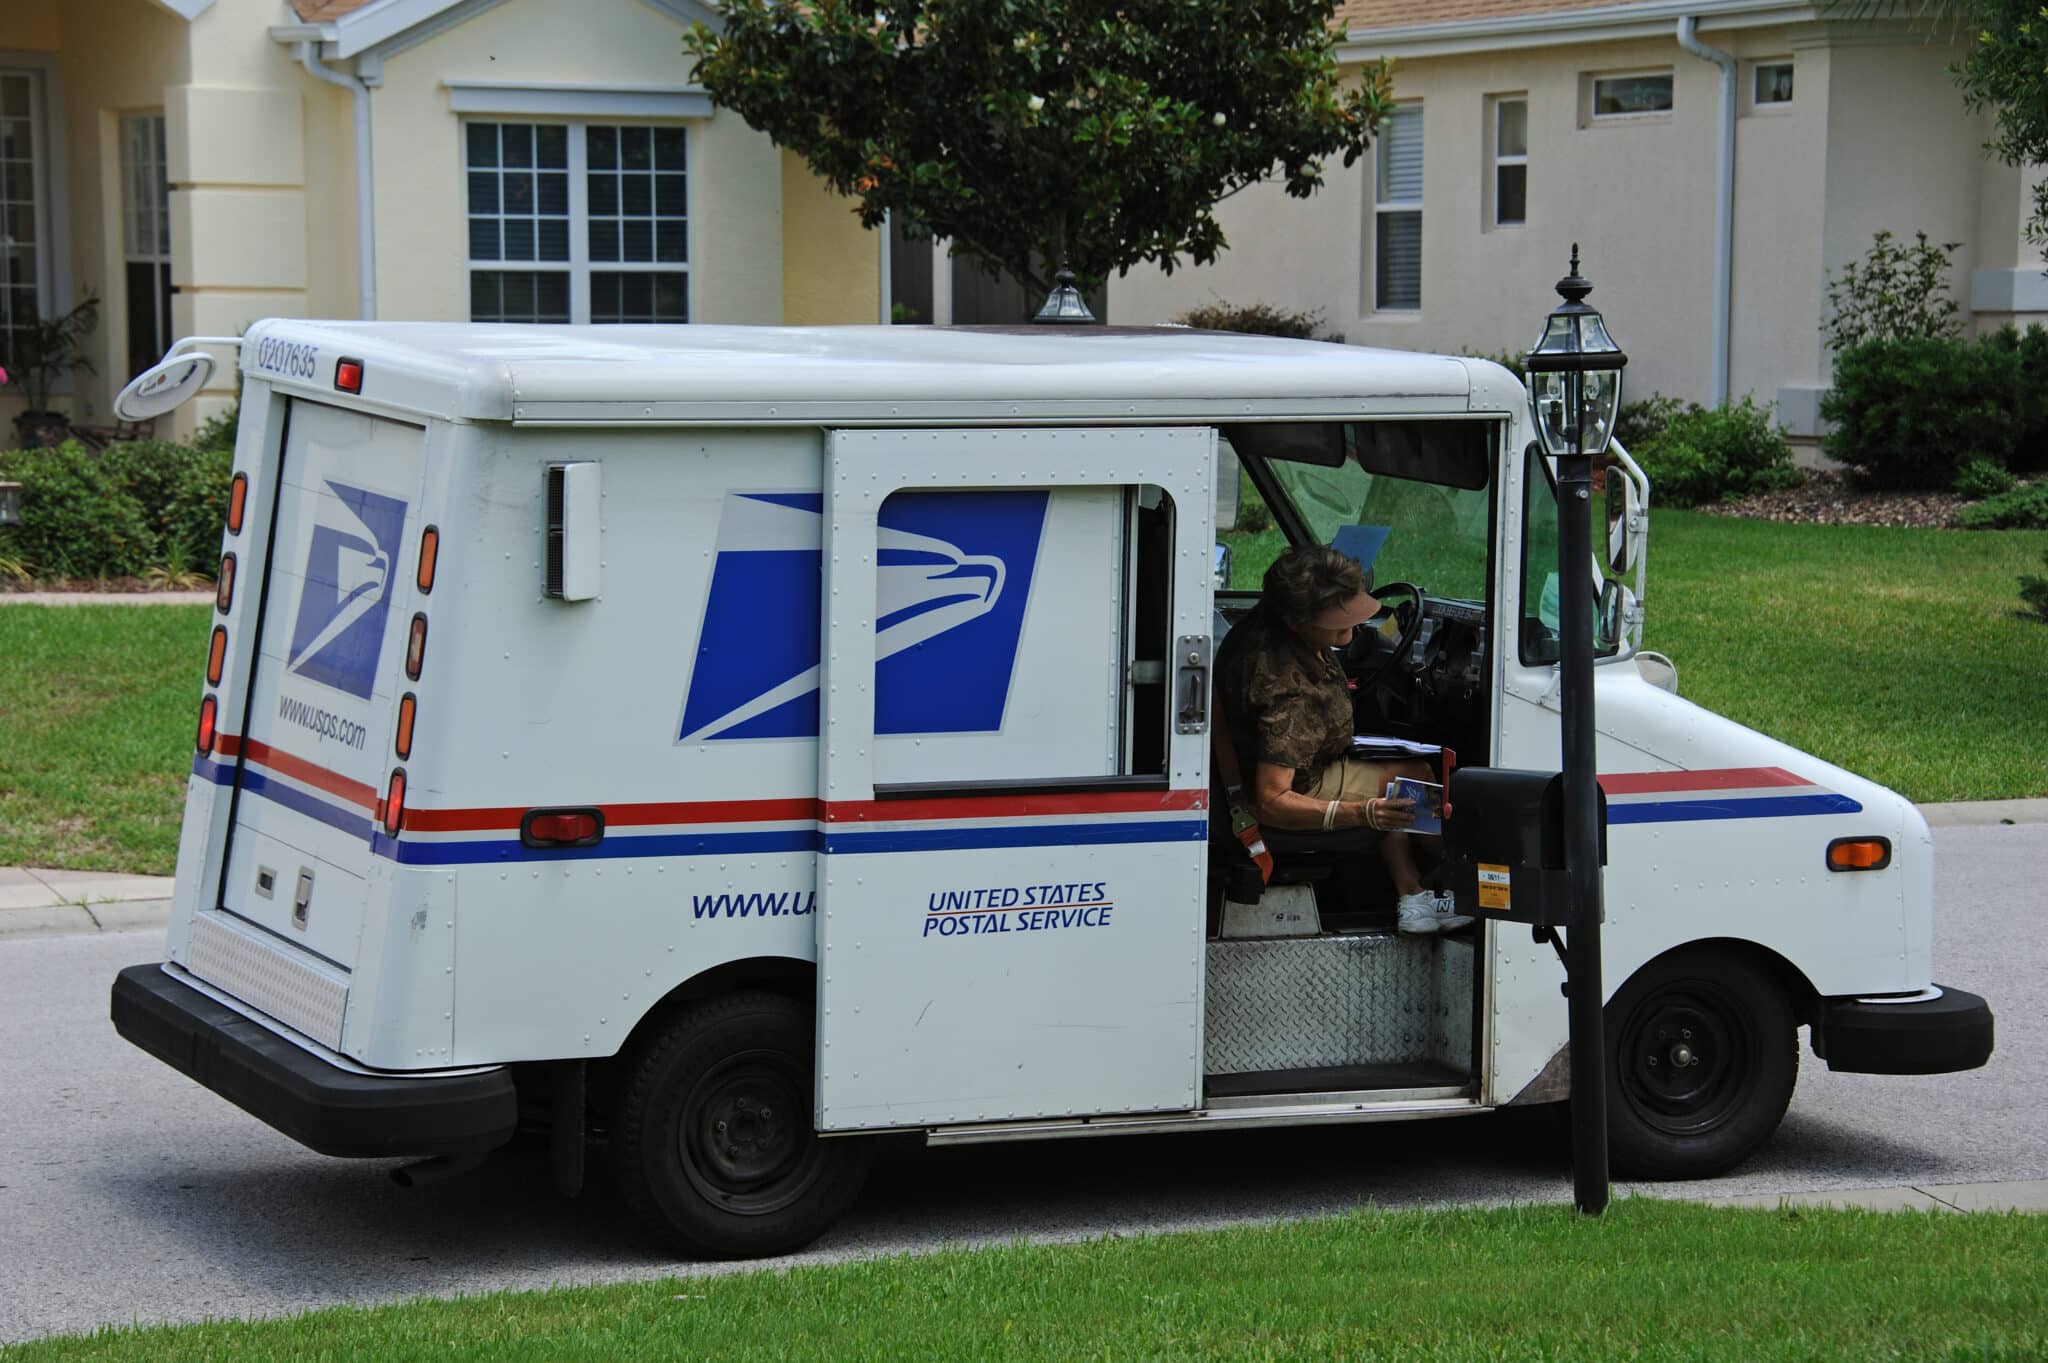 Georgia postal workers plead guilty in scheme to deliver illegal drugs through the mail